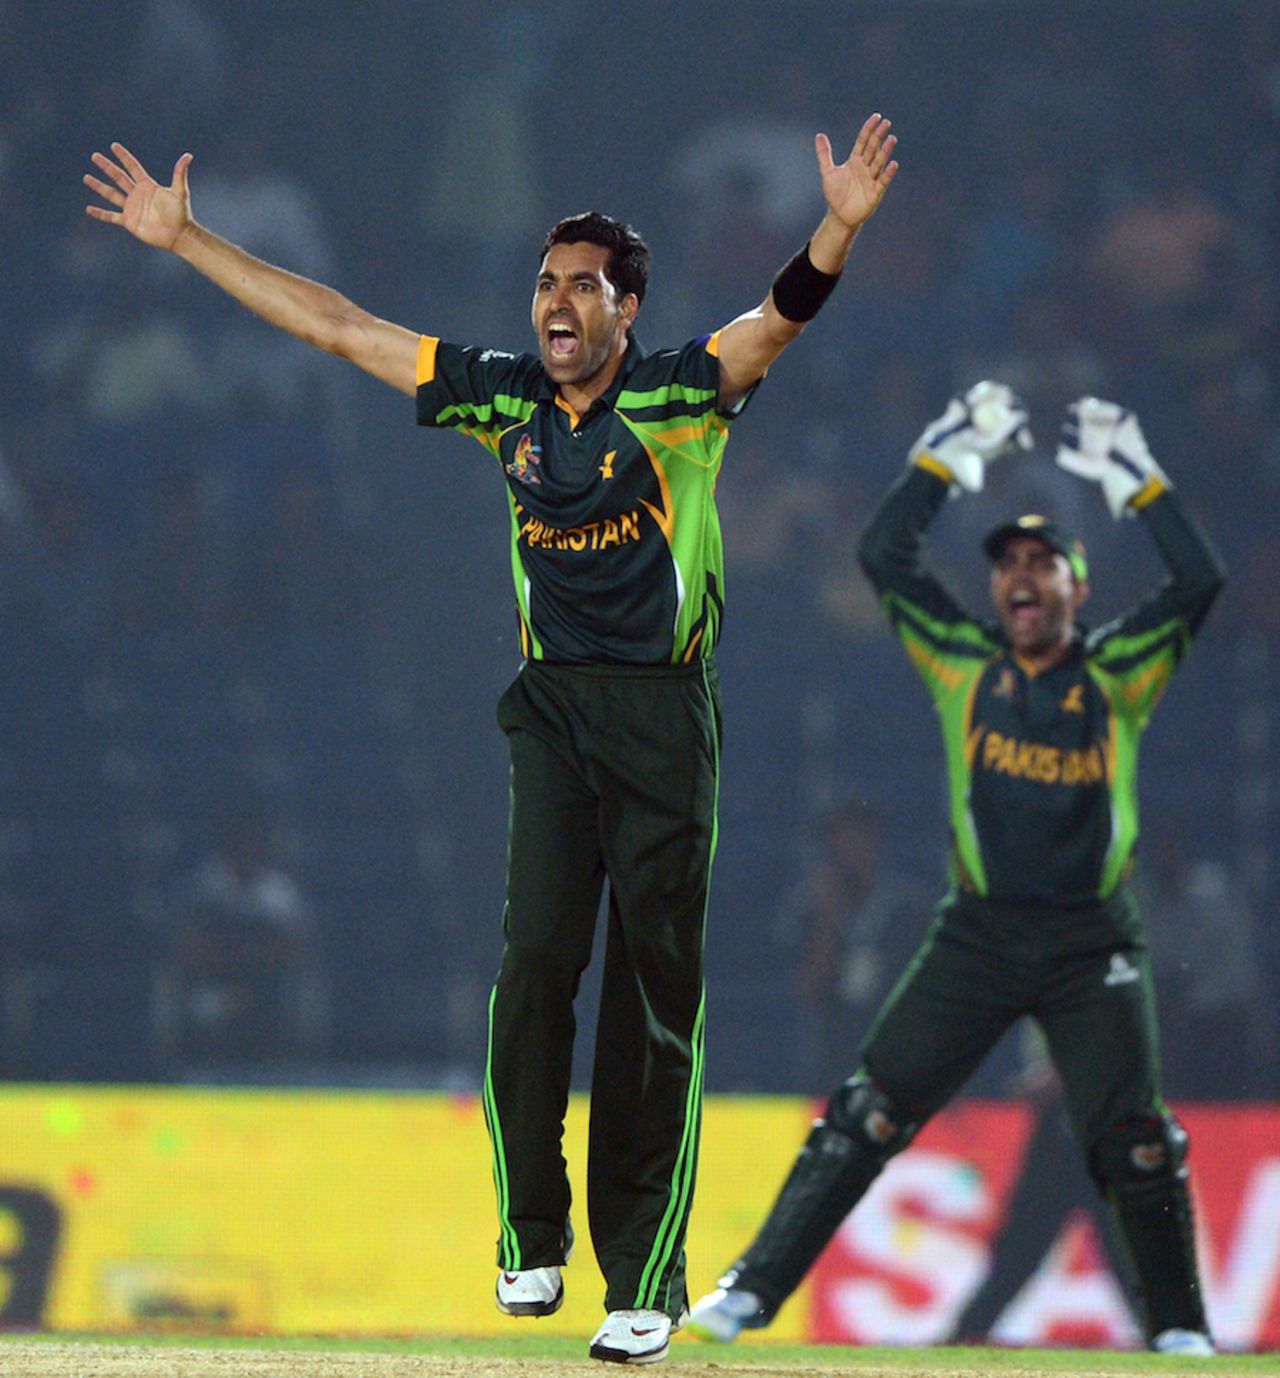 Umar Gul appeals successfully for a caught behind decision, Afghanistan v Pakistan, Asia Cup 2014, Fatullah, February 27, 2014